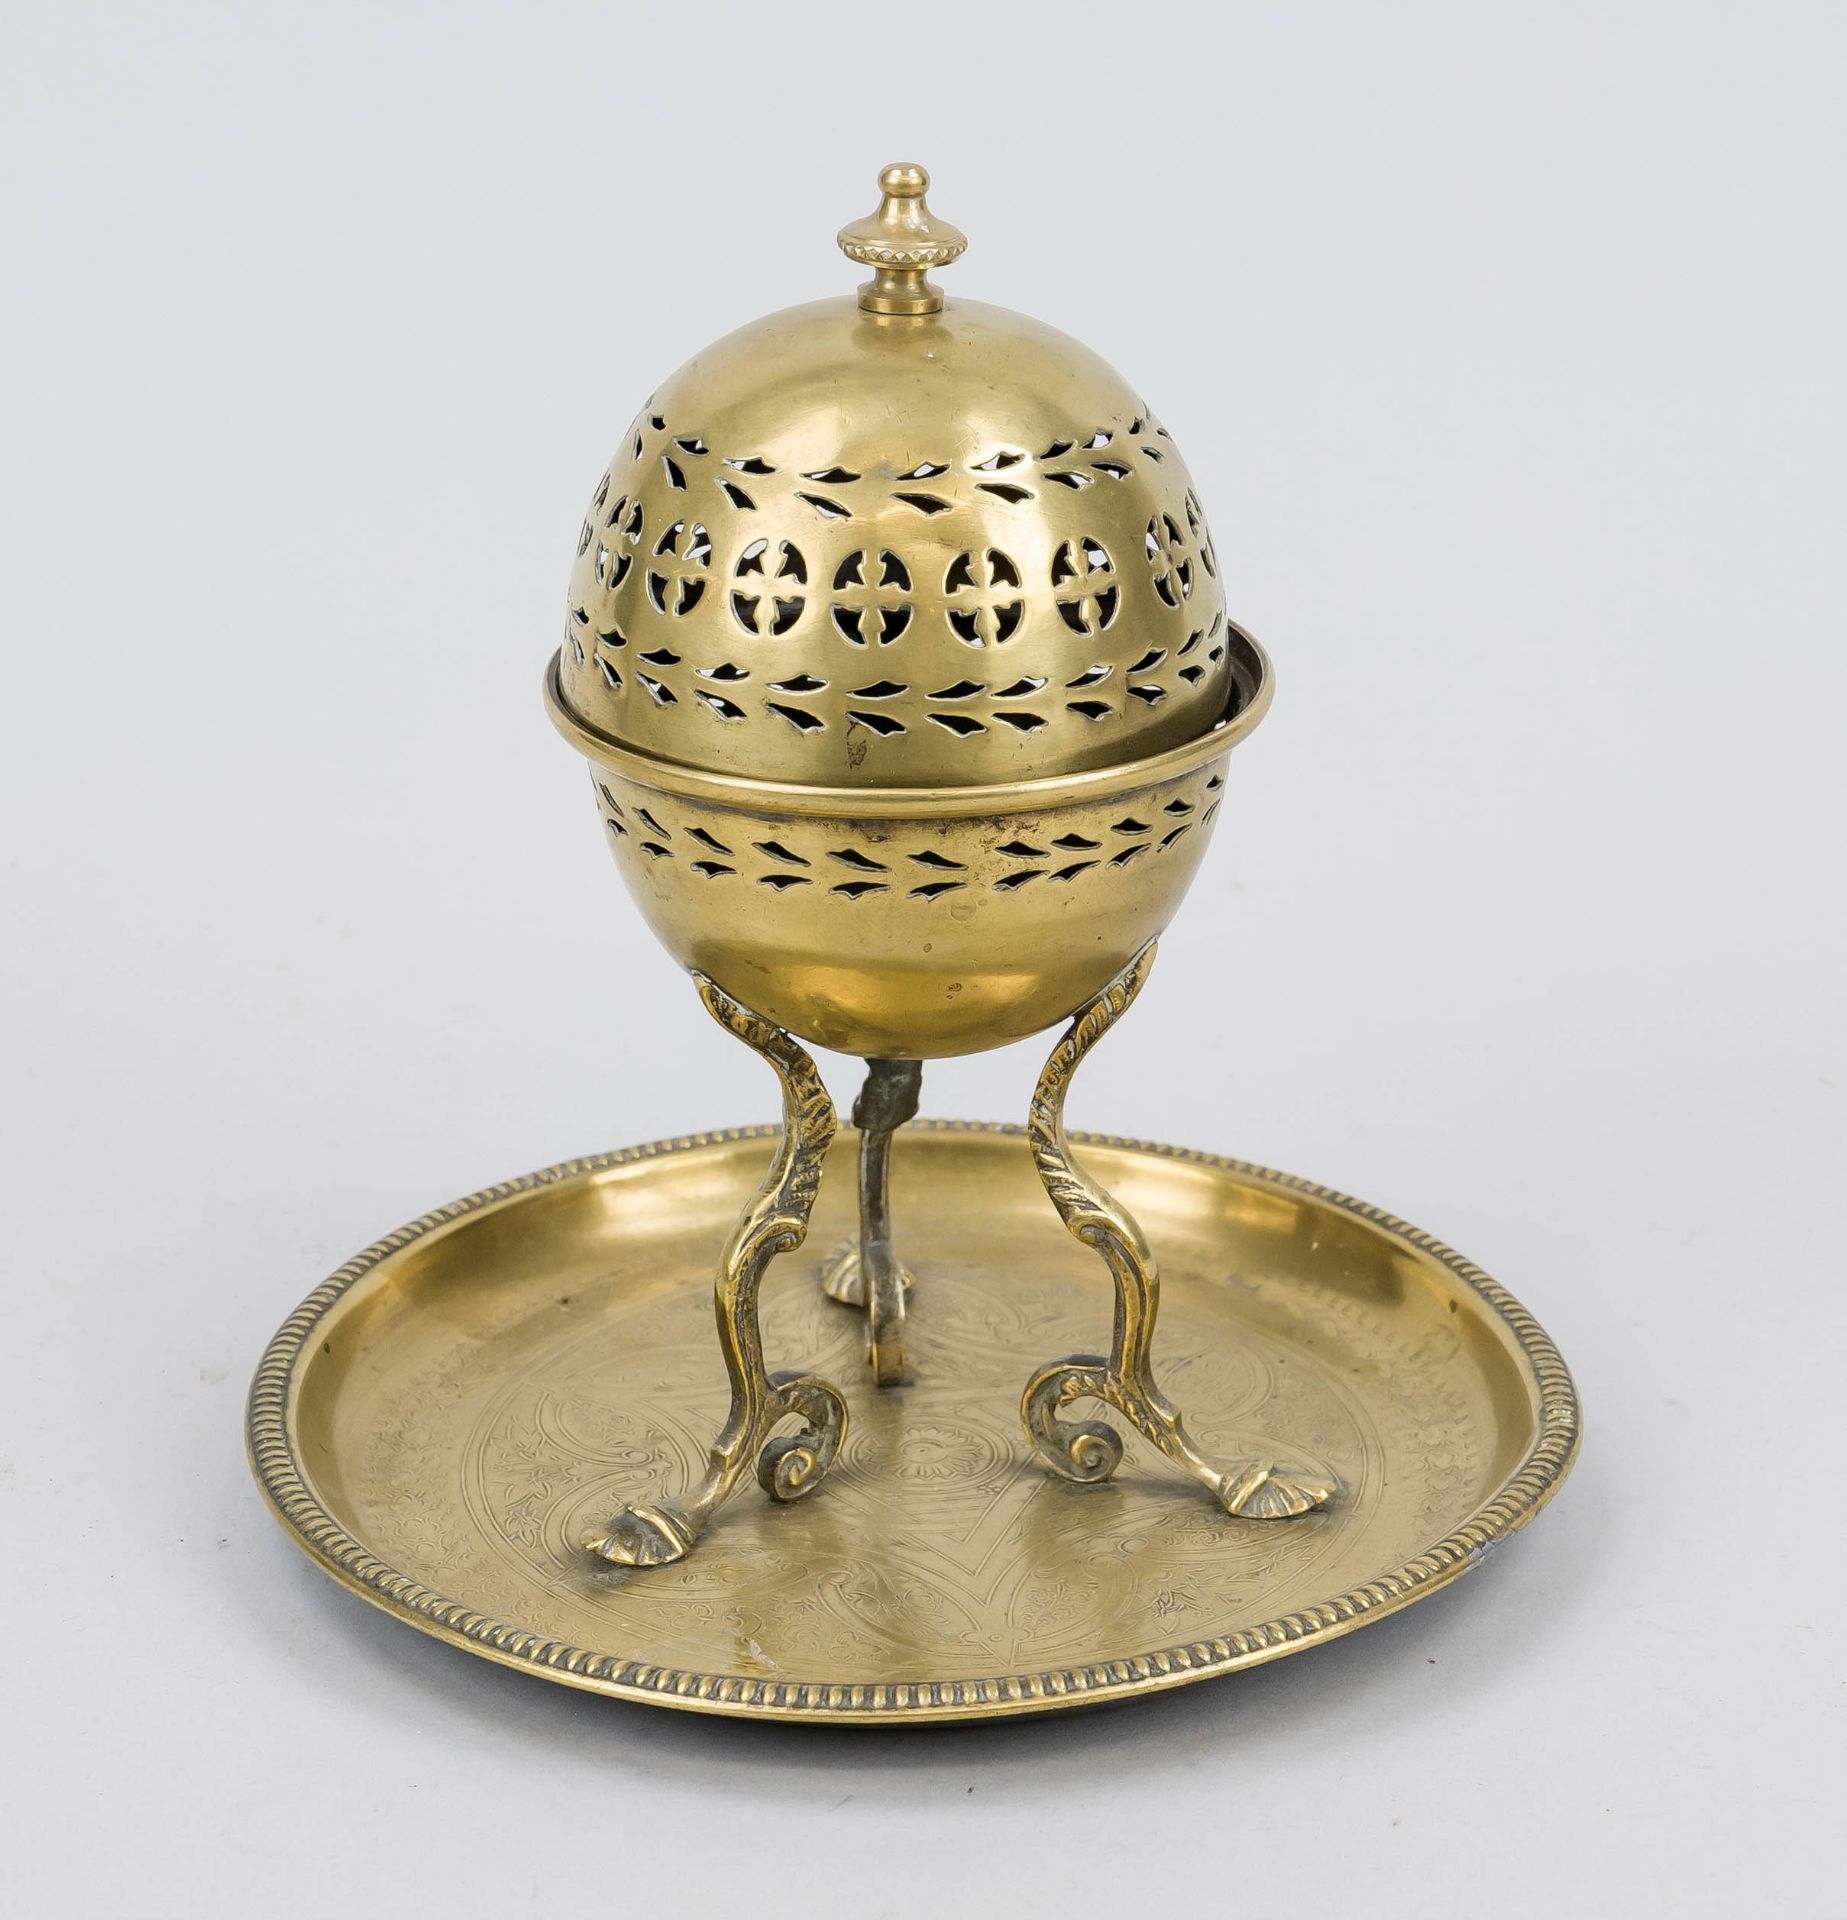 Table warming ball on tray, 19th century, brass, ball on three curved legs with stylized hoof